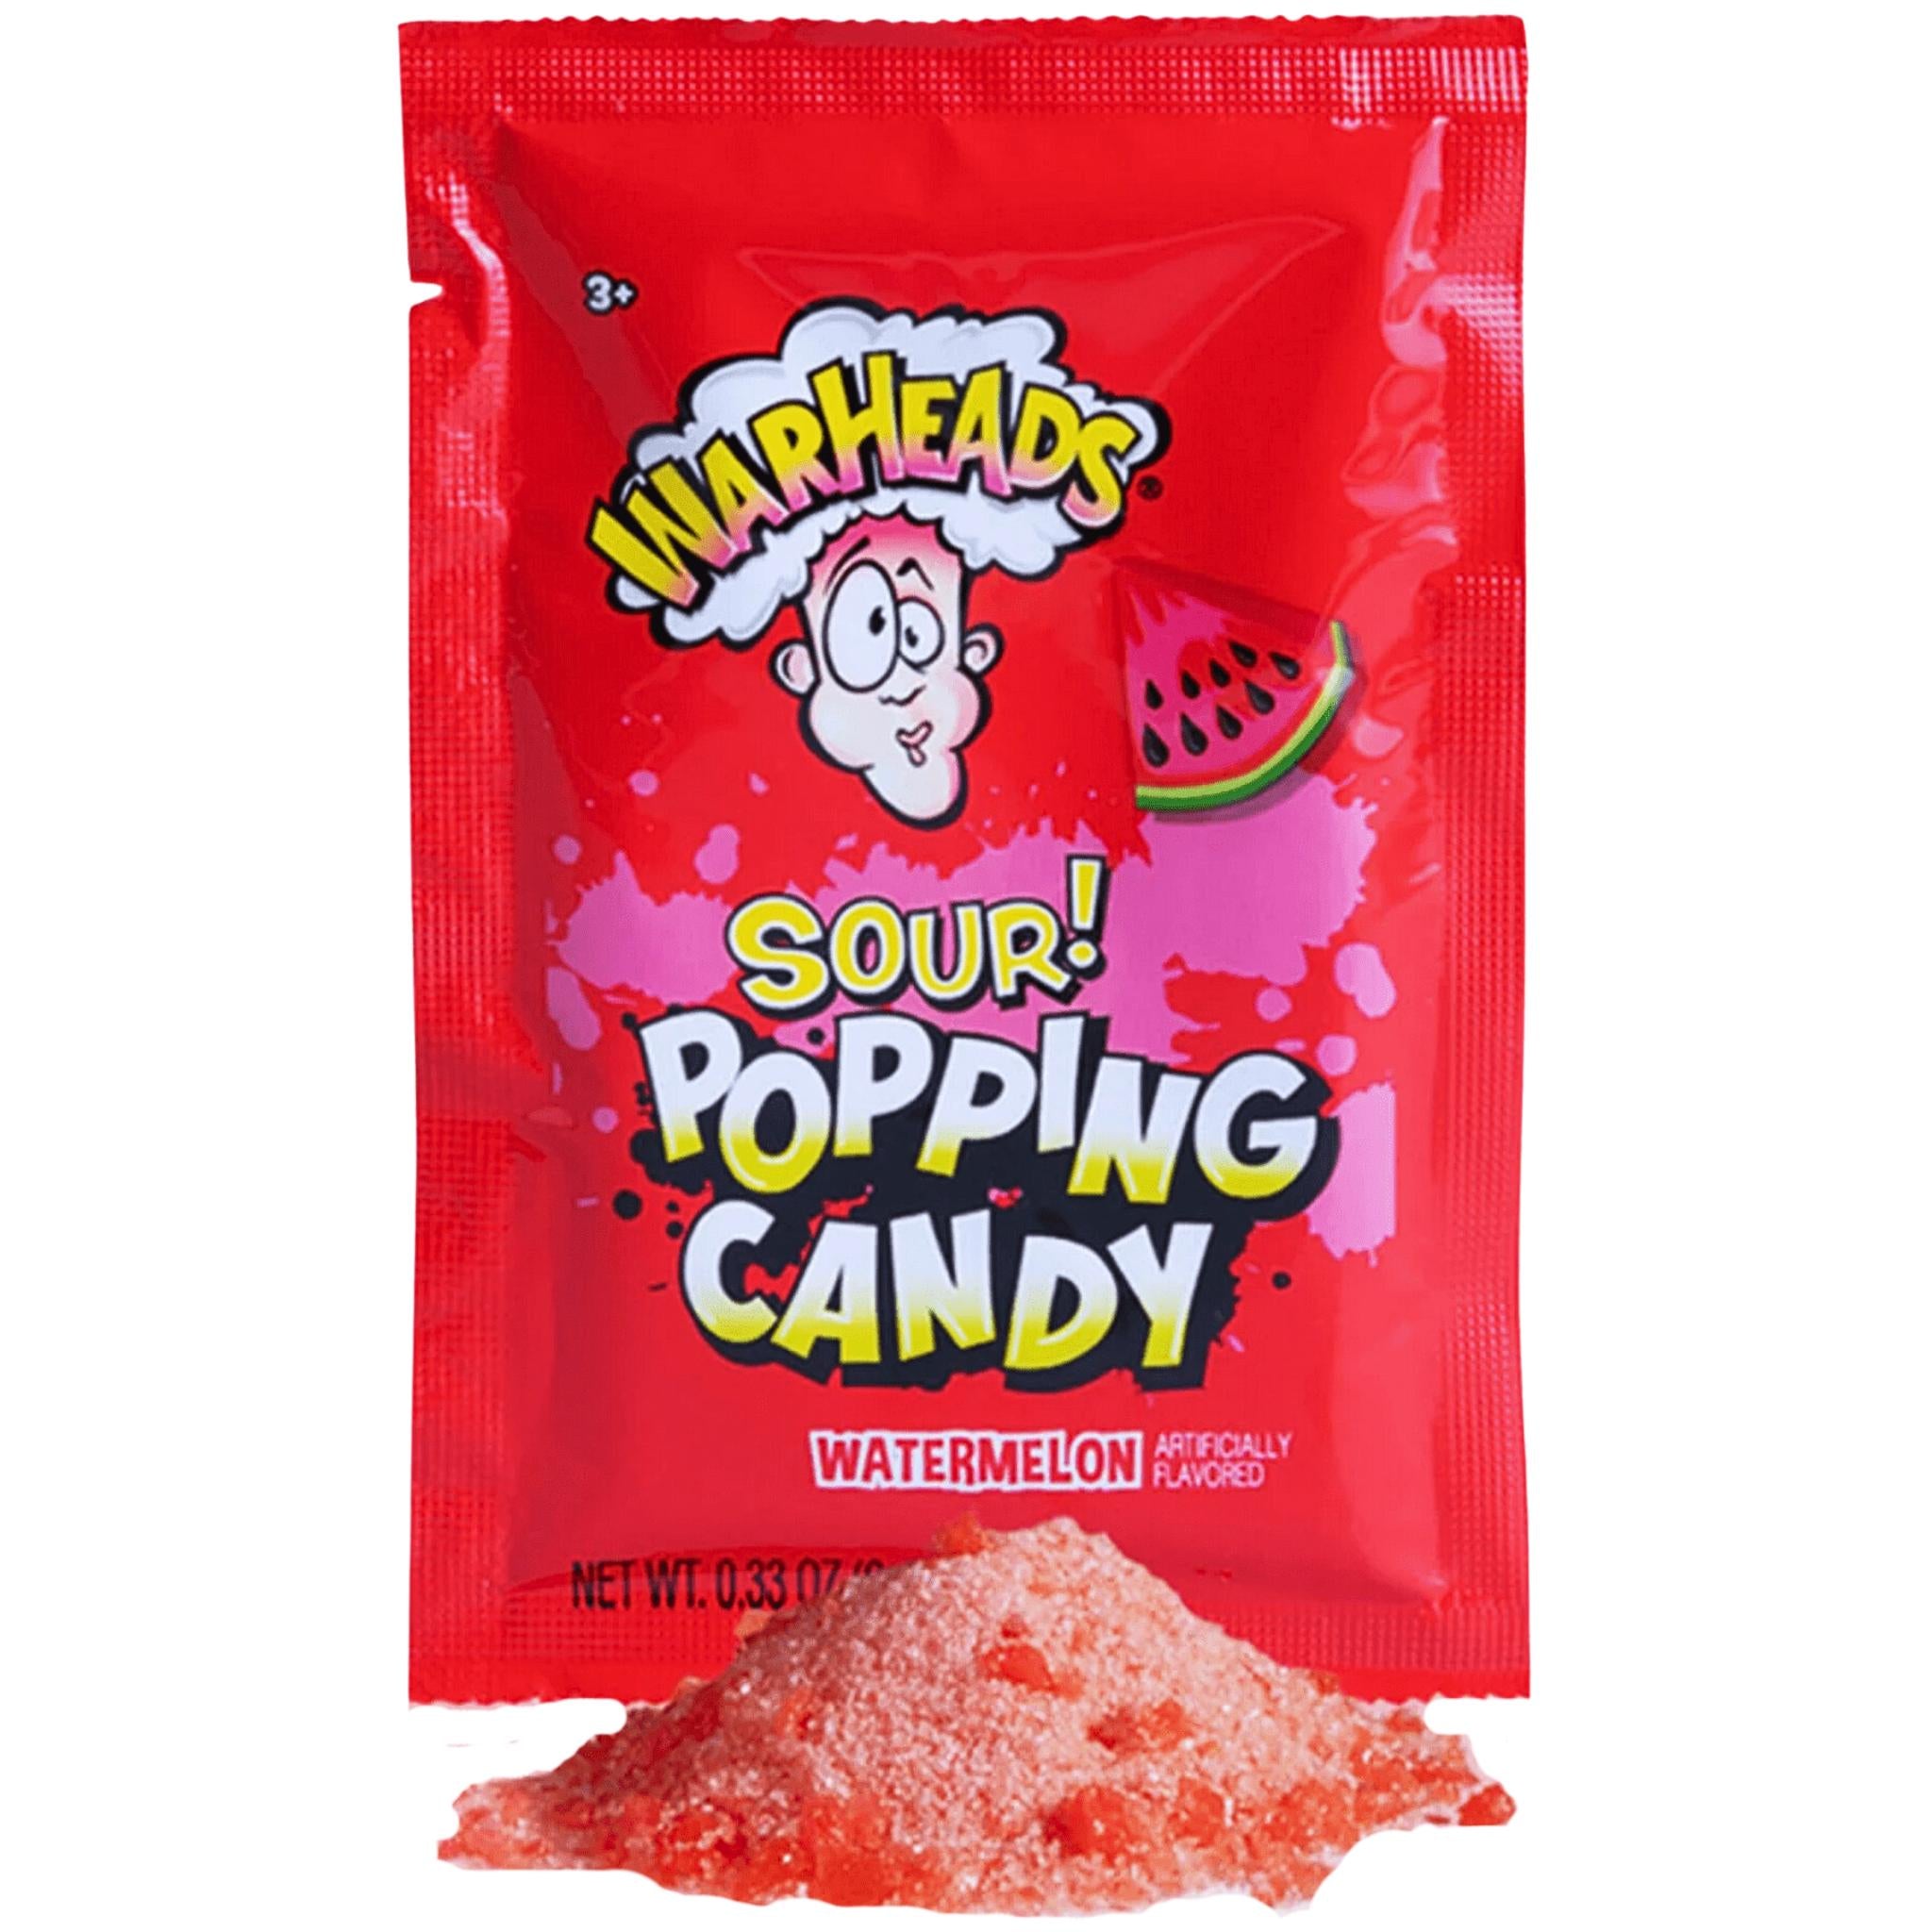 Warheads Sour Popping Candy Watermelon - 9g